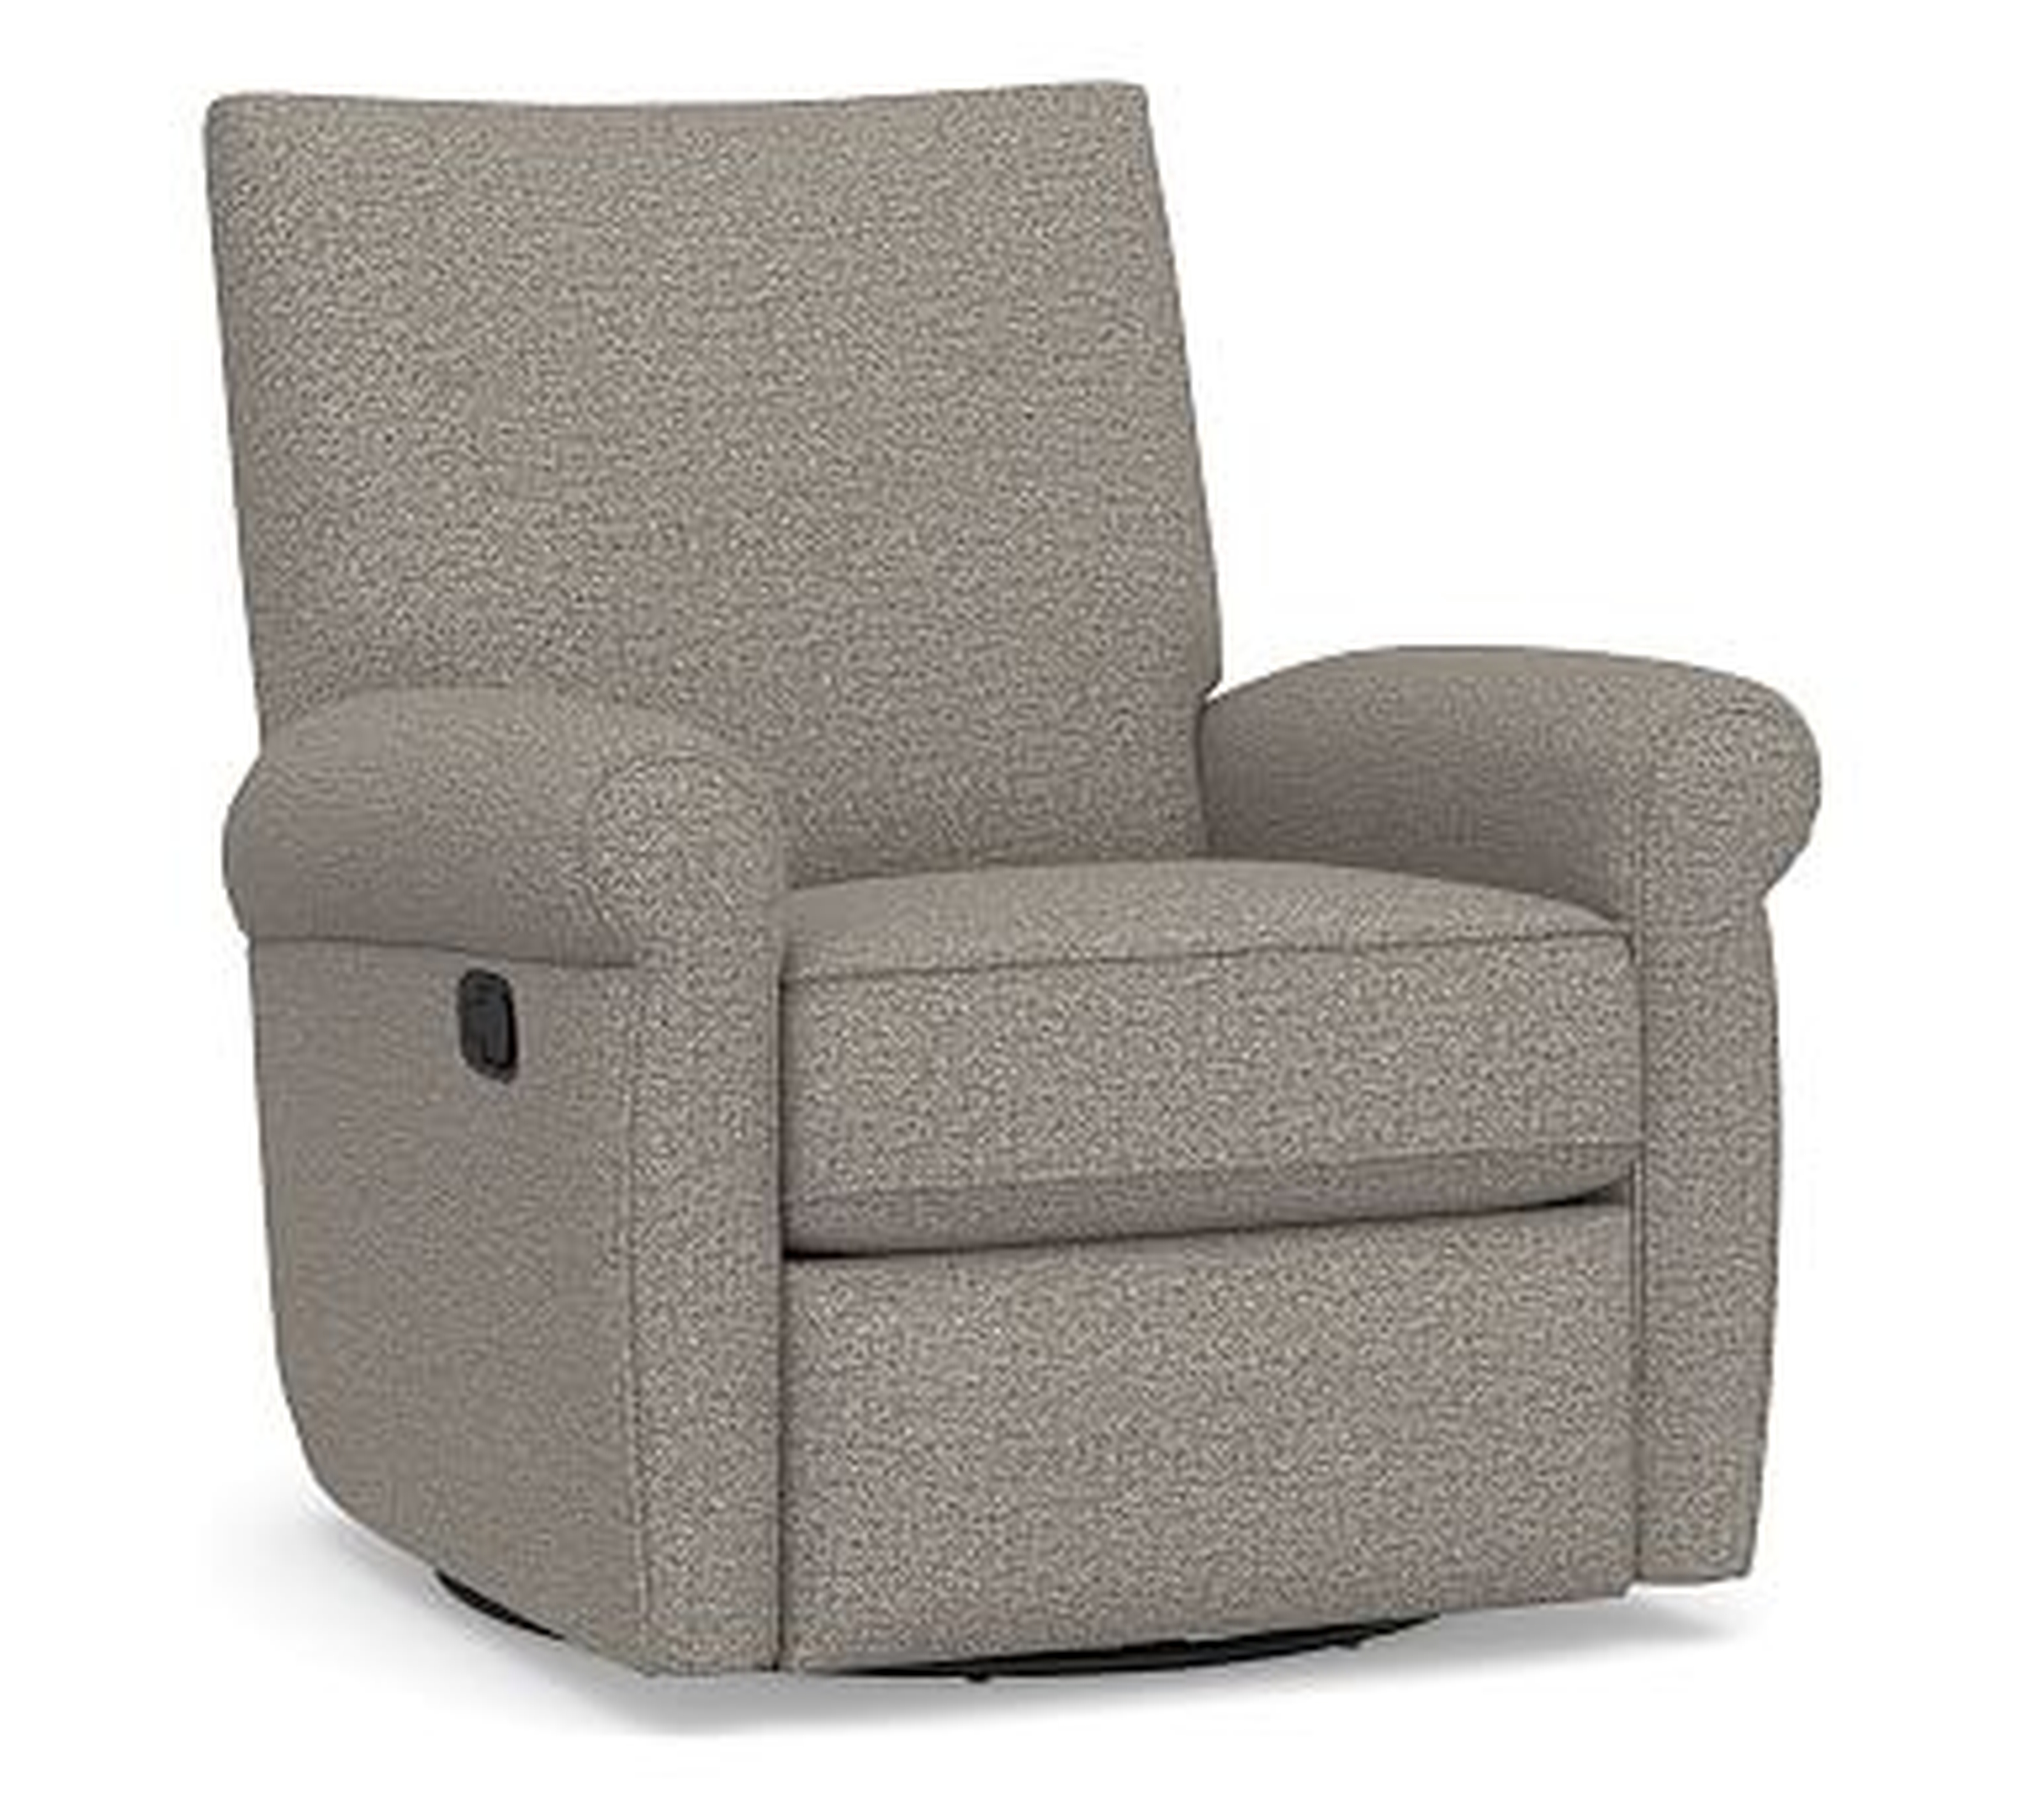 Grayson Roll Arm Upholstered Swivel Recliner, Polyester Wrapped Cushions, Performance Chateau Basketweave Light Gray - Pottery Barn